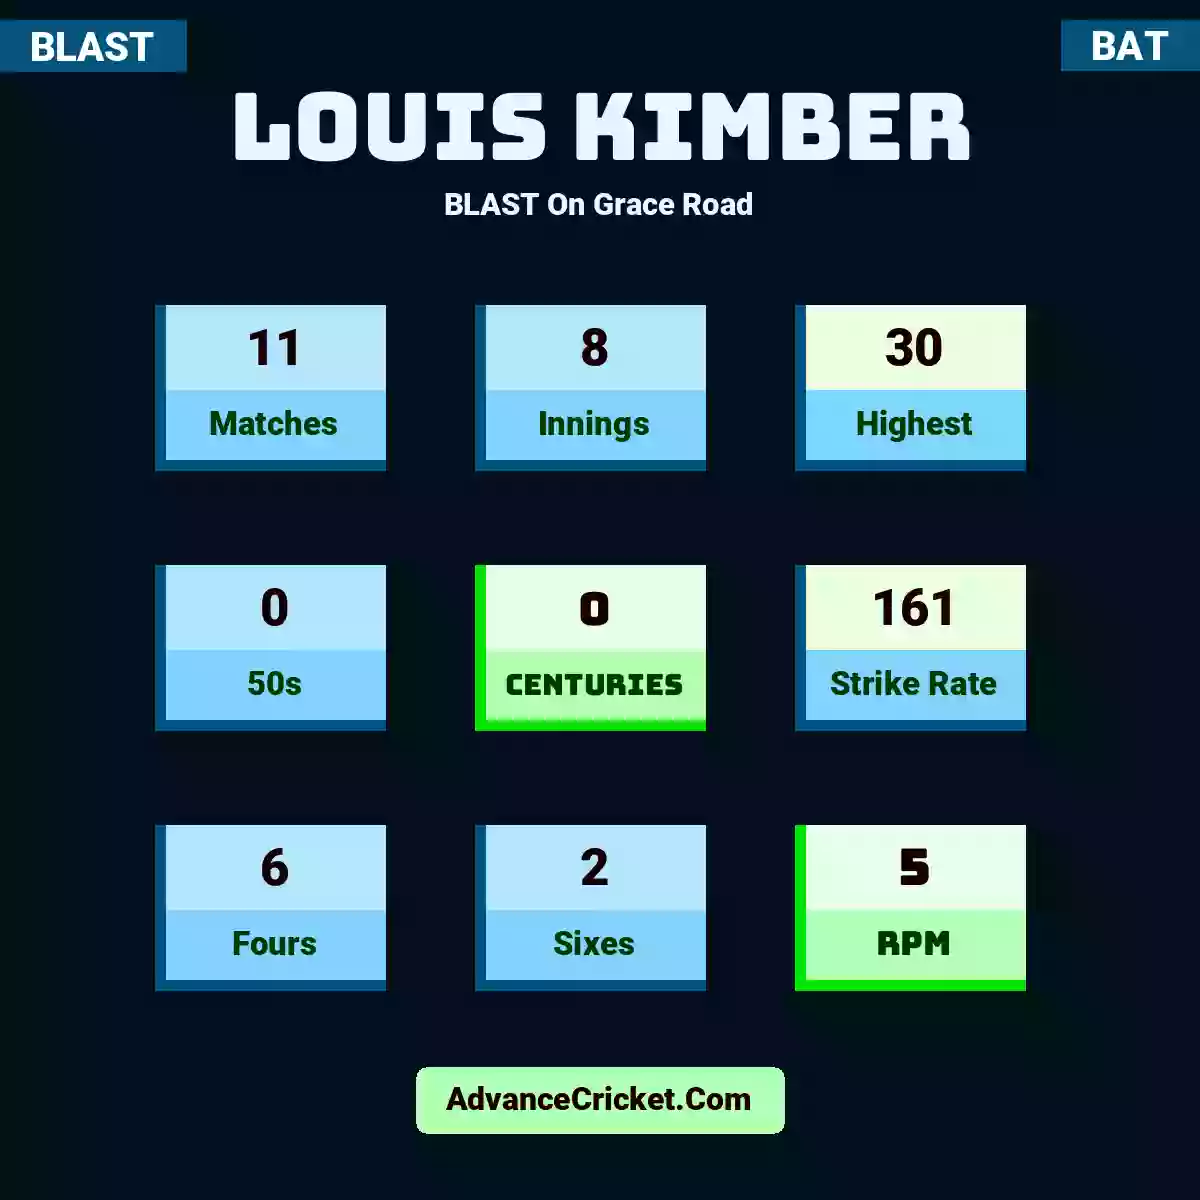 Louis Kimber BLAST  On Grace Road, Louis Kimber played 11 matches, scored 30 runs as highest, 0 half-centuries, and 0 centuries, with a strike rate of 161. L.Kimber hit 6 fours and 2 sixes, with an RPM of 5.